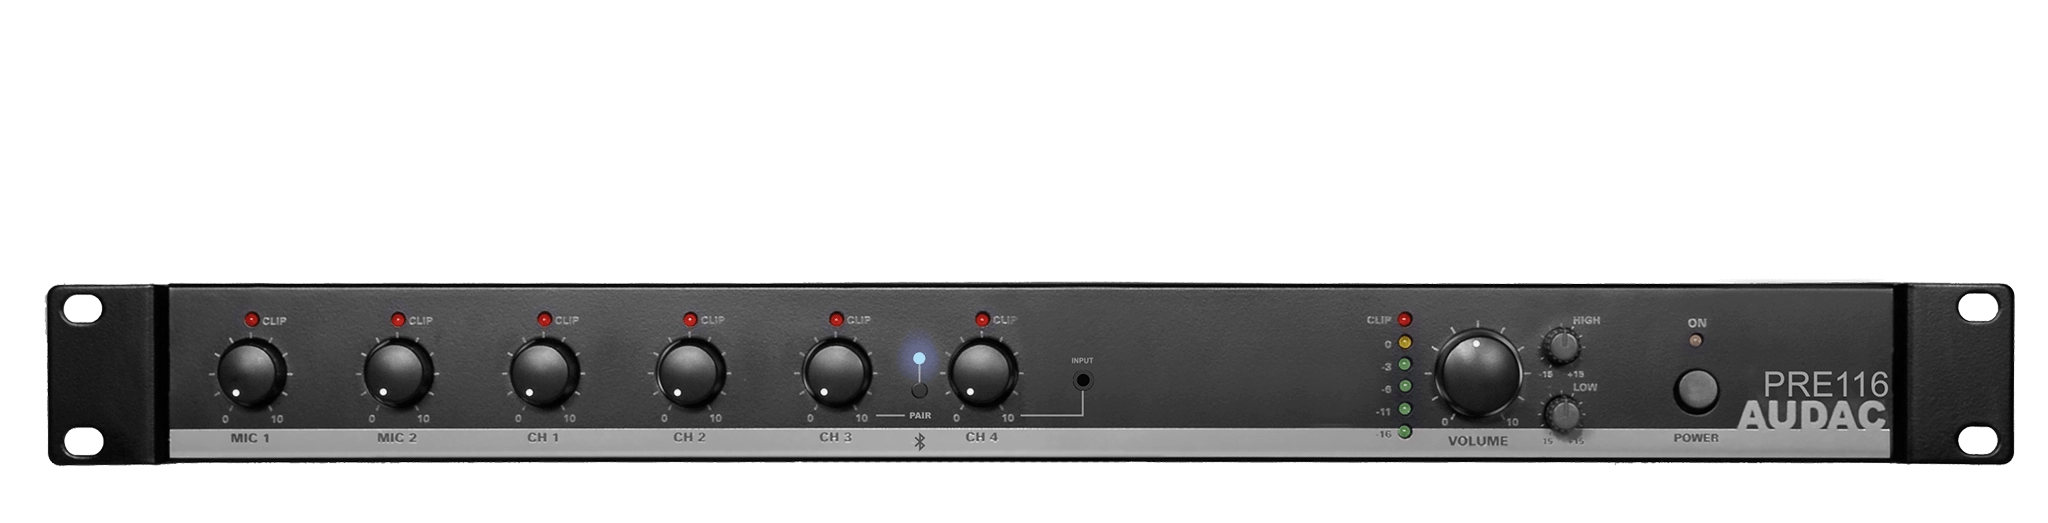 AUDAC PRE116 - 6 Channel Bluetooth Stereo Preamplifier - 19" Rack Mixer